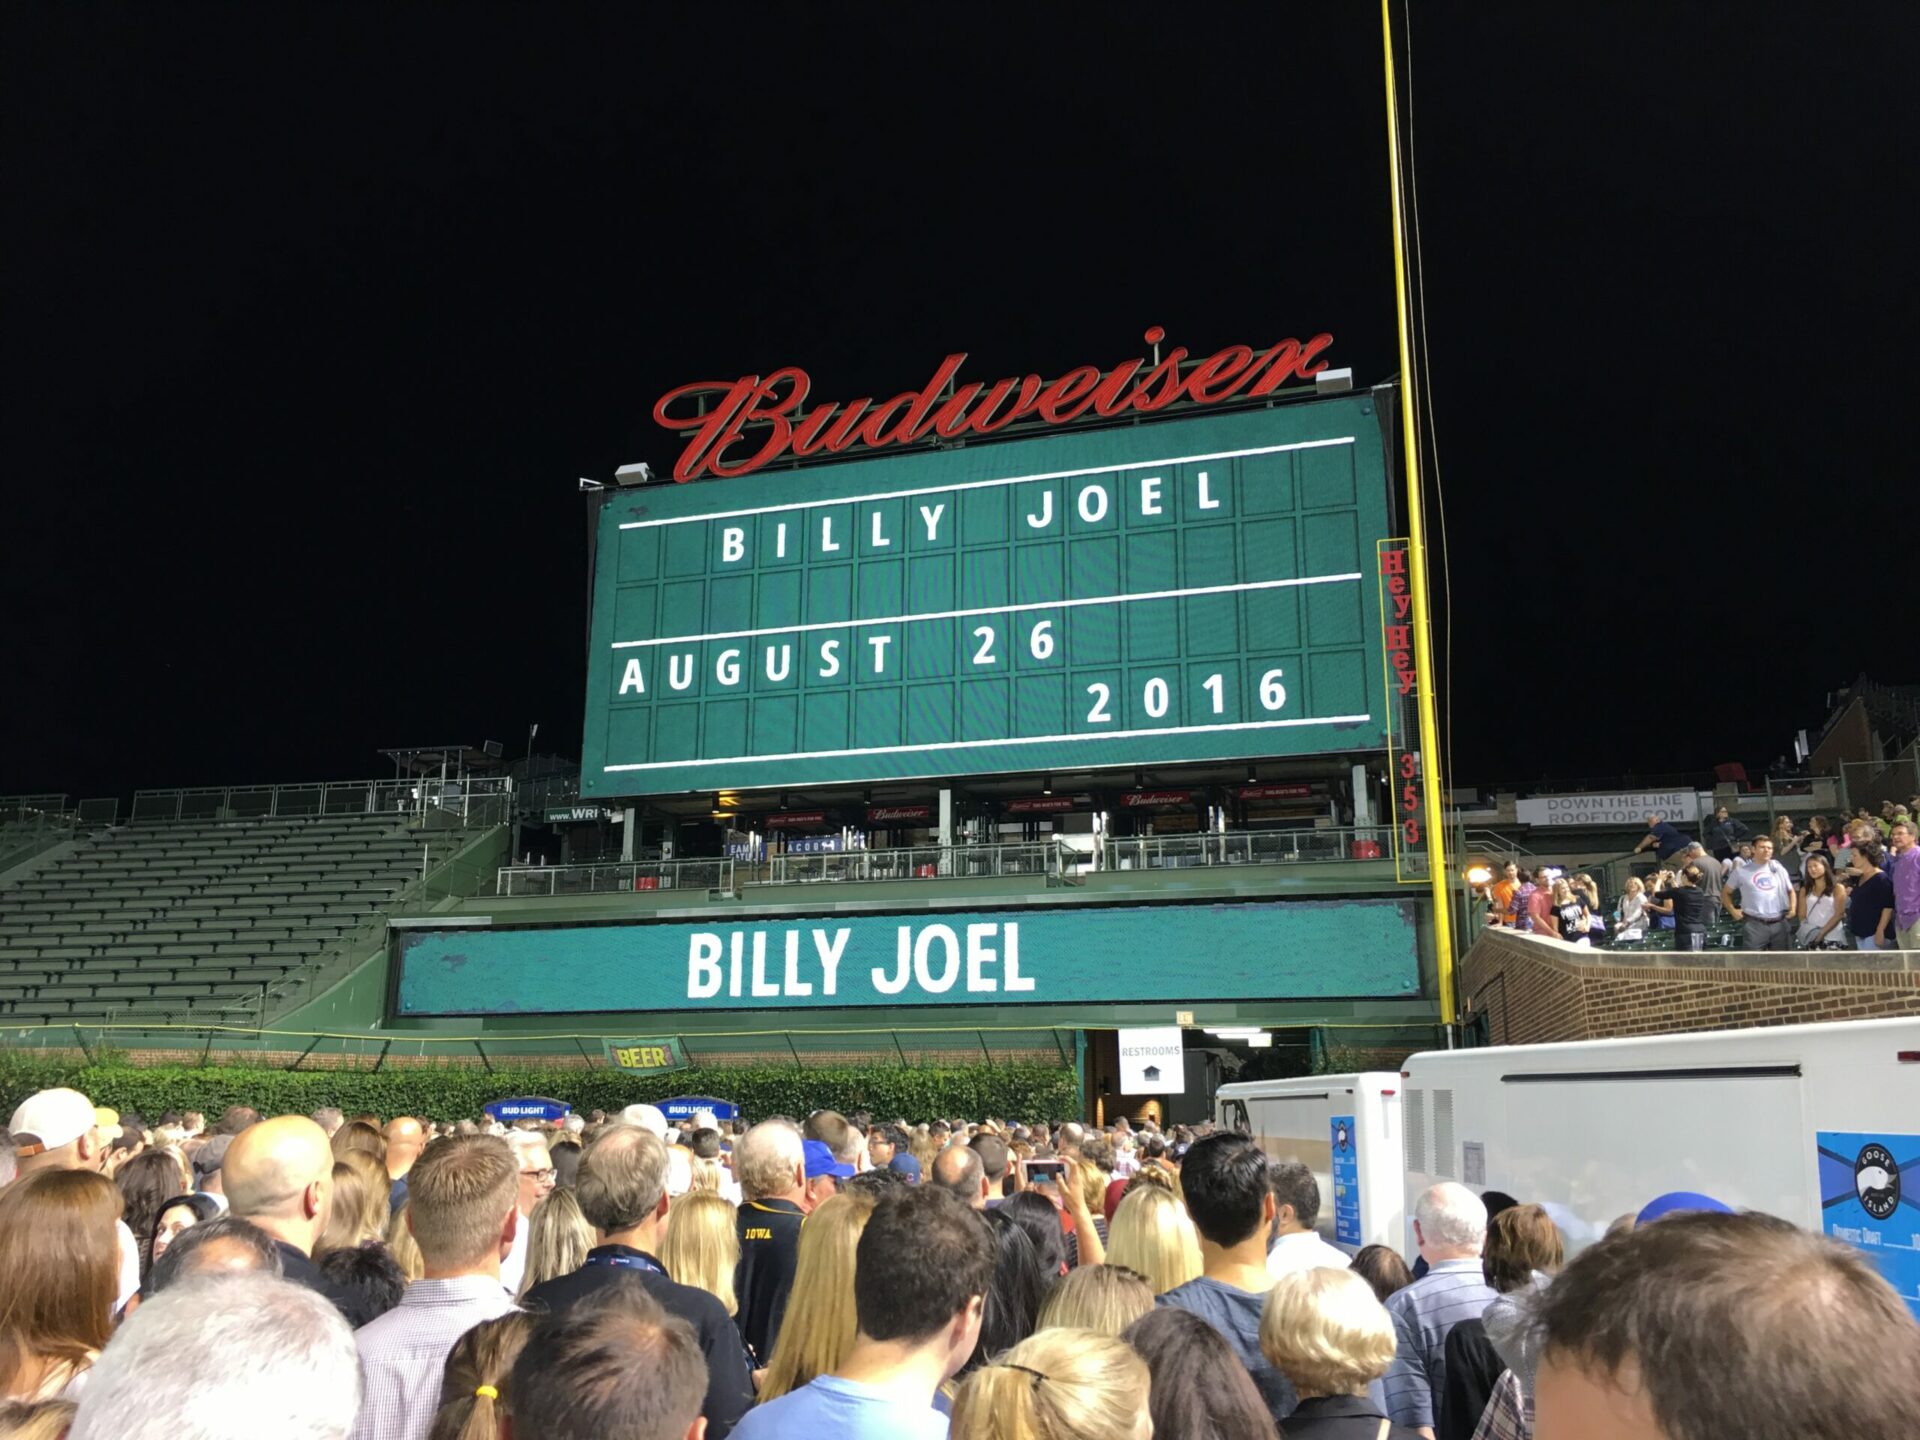 What To Wear To A Billy Joel Concert